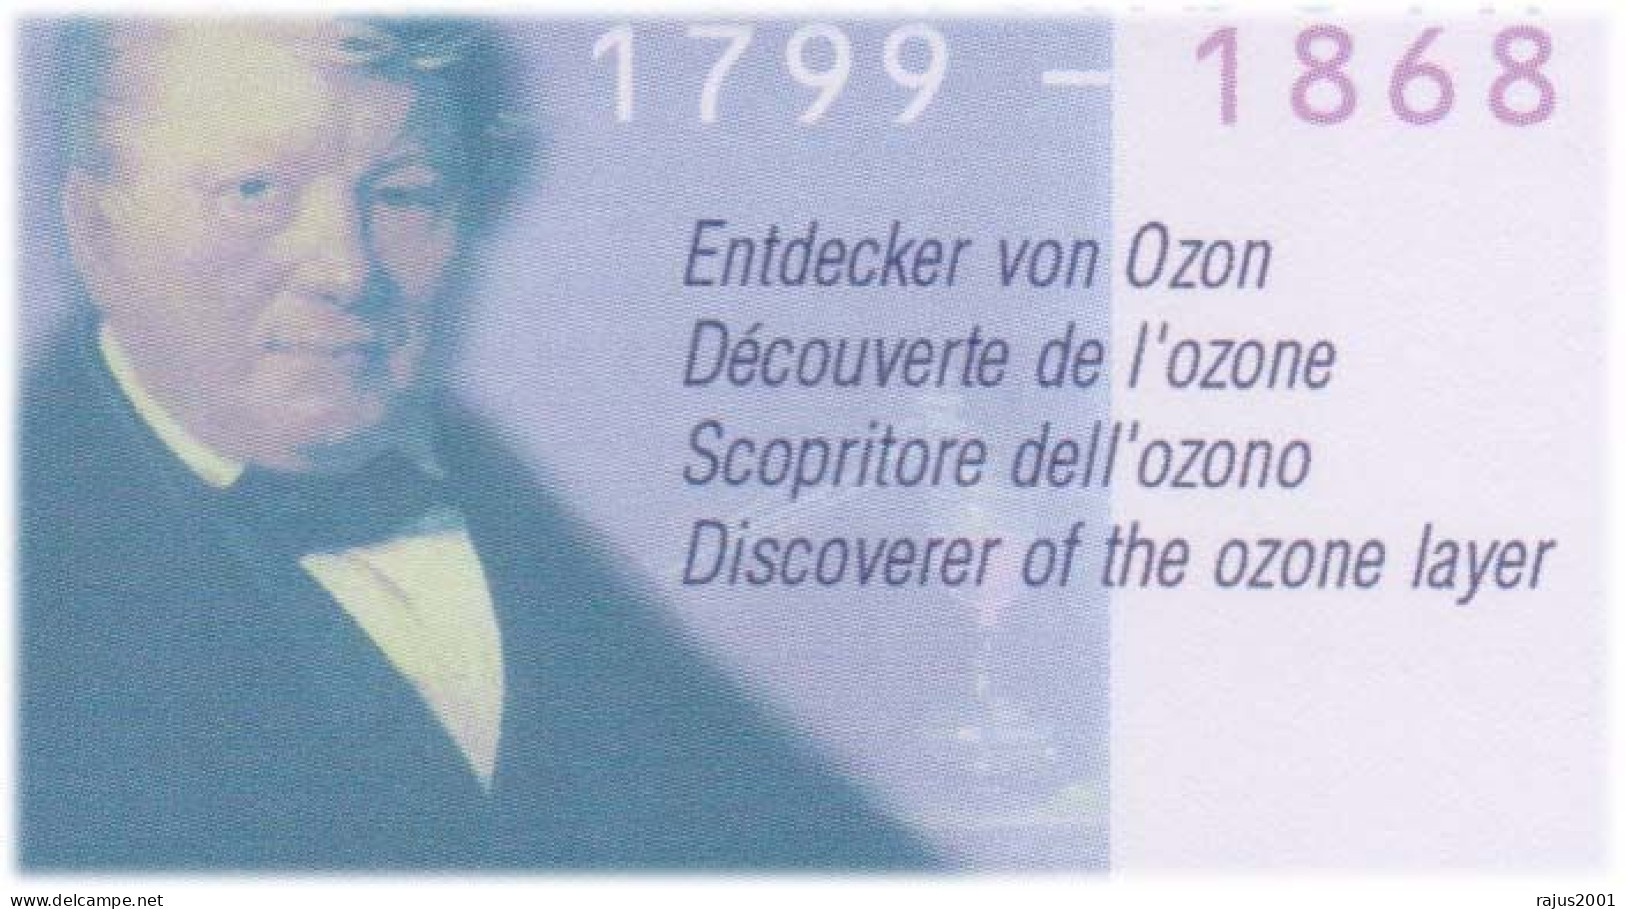 Christian Friedrich Schonbein Discoverer Of The Ozone Layer, Inventing The Fuel Cell, Chemist, Science, Switzerland FDC - Chemistry